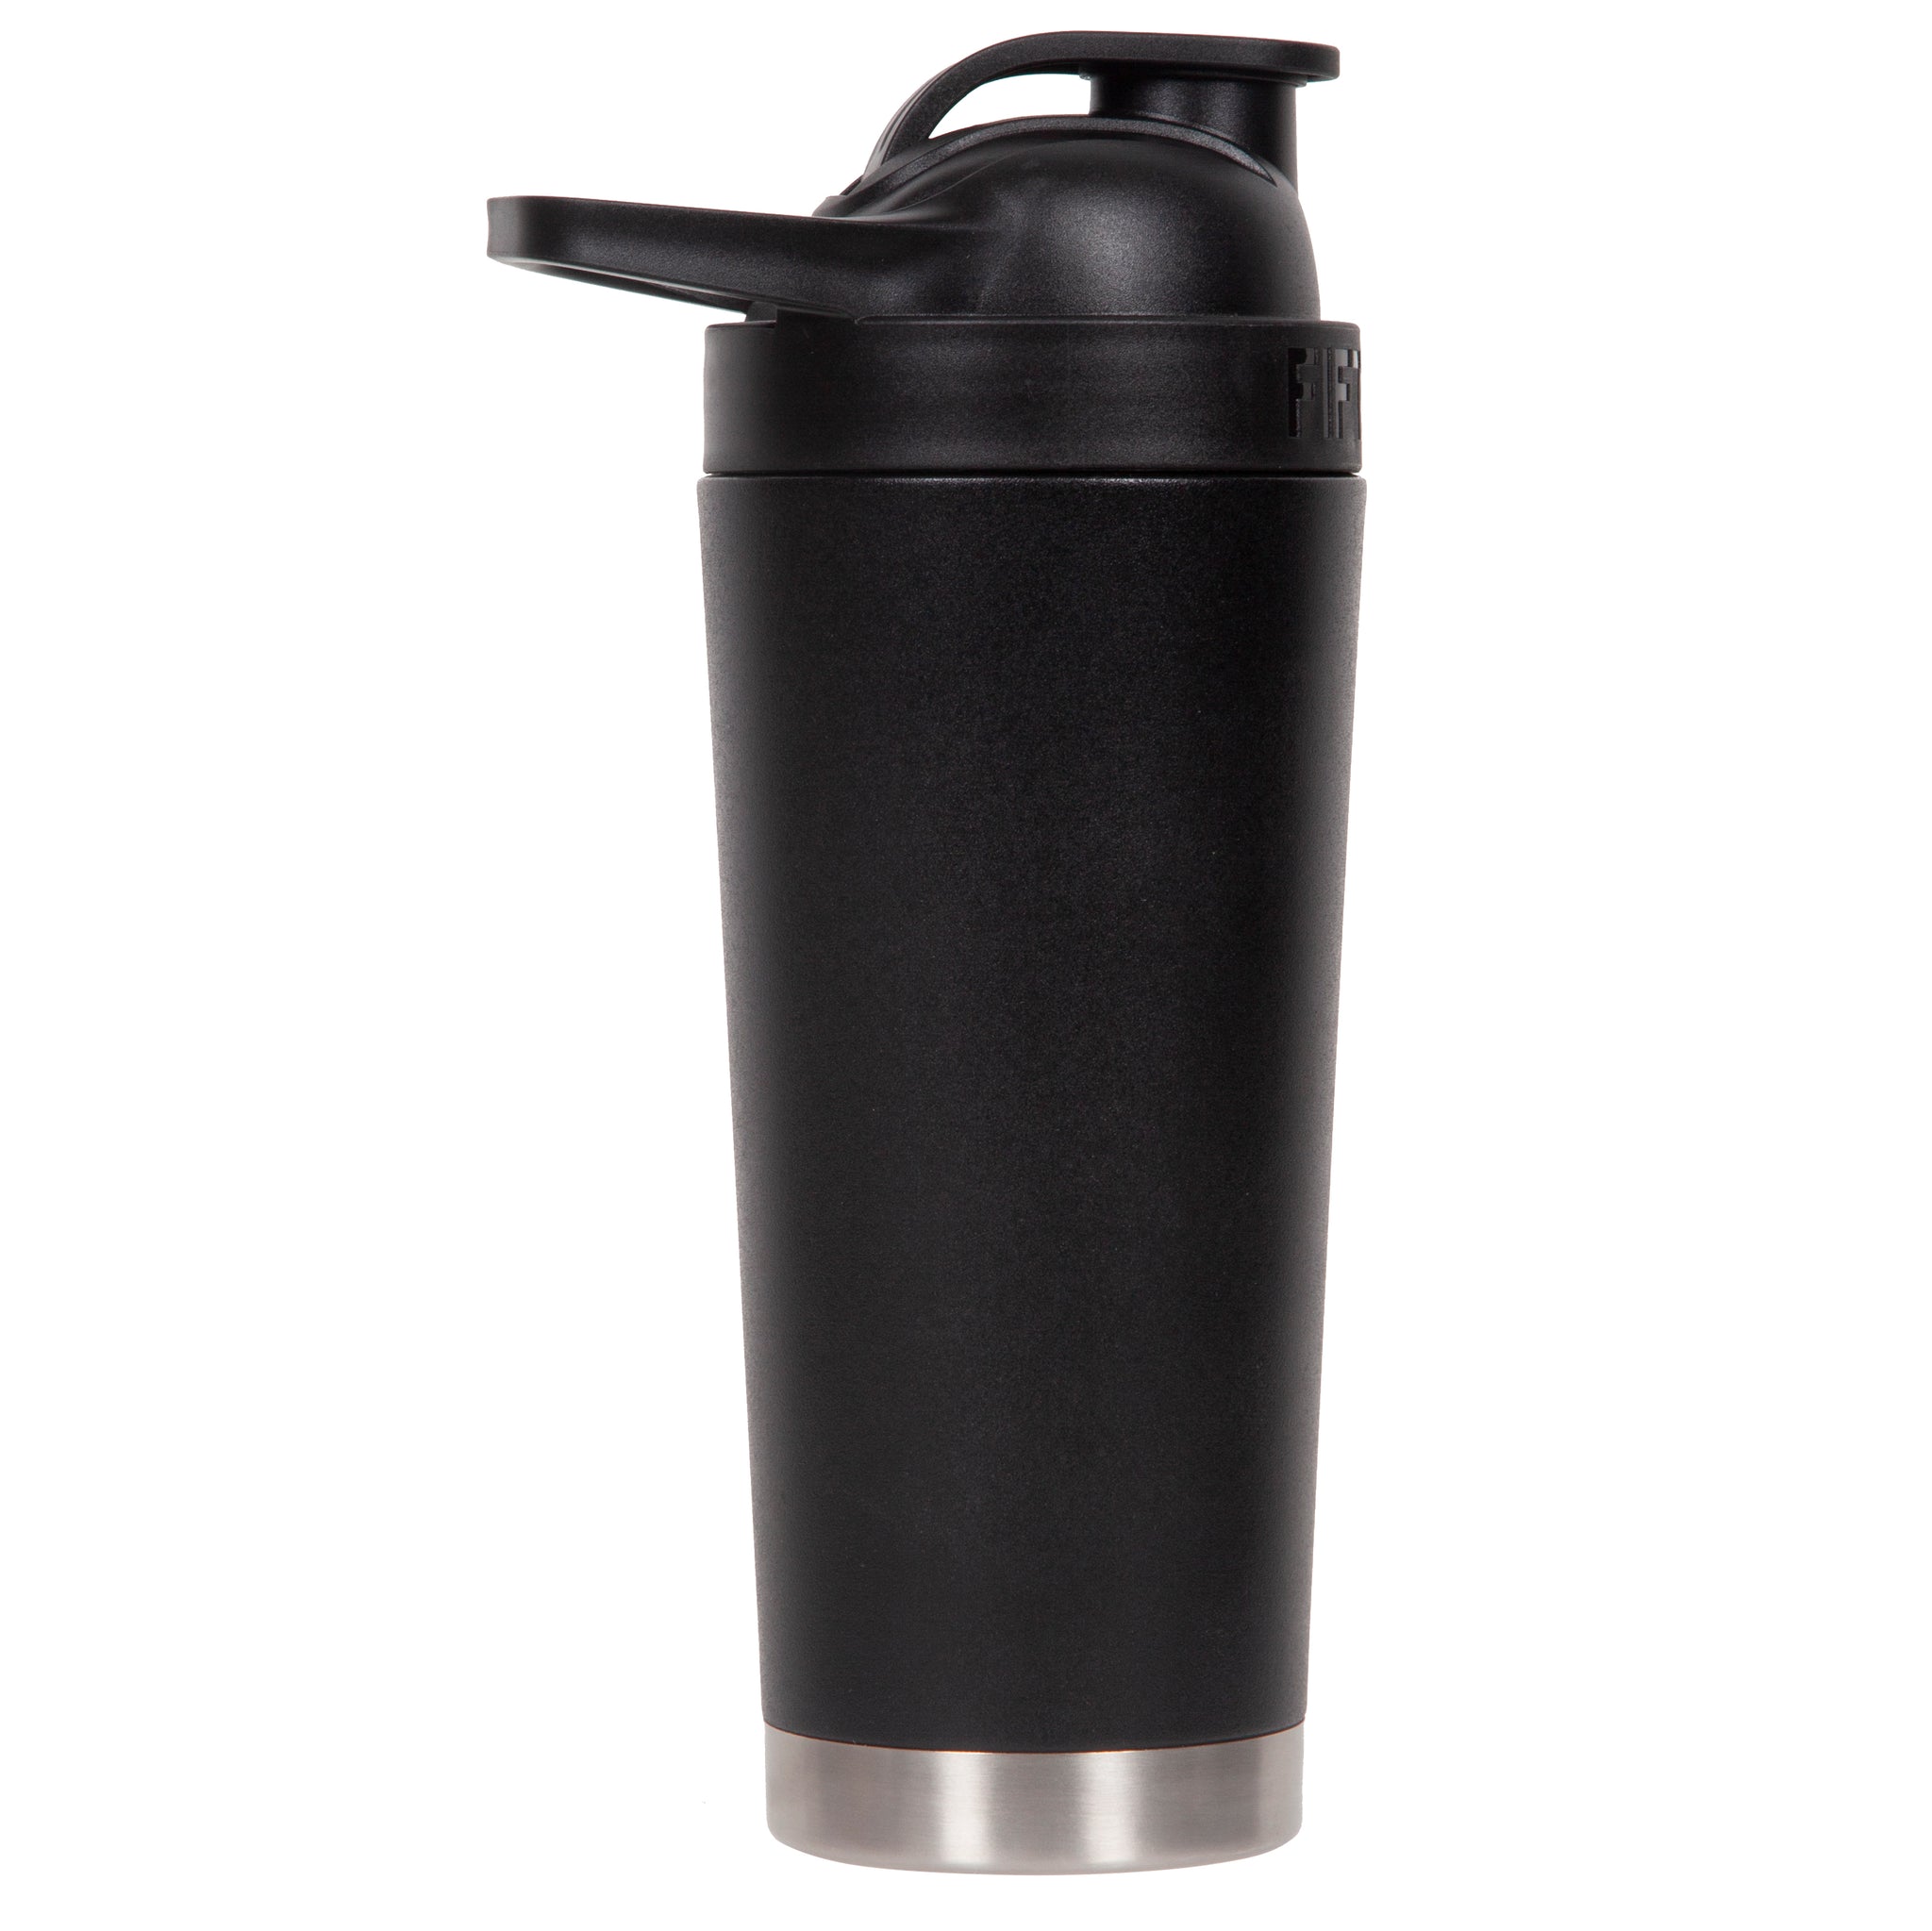 25oz Stainless Steel Protein Shaker Cup